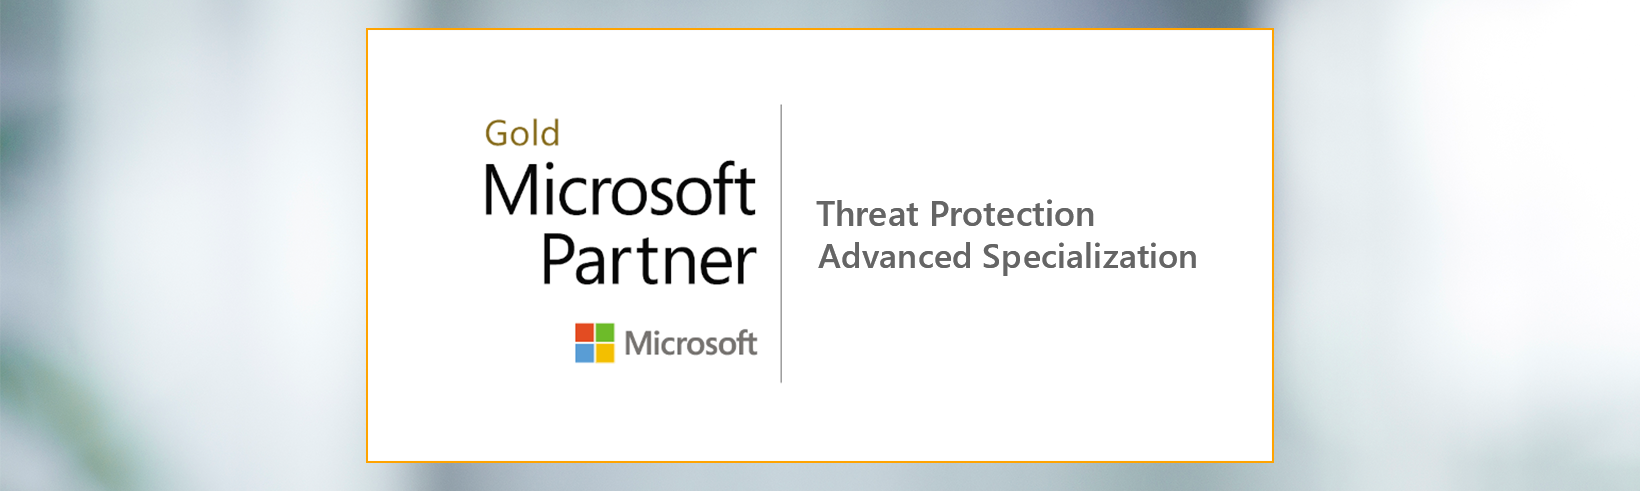 Advanced Specalization Threat Protection